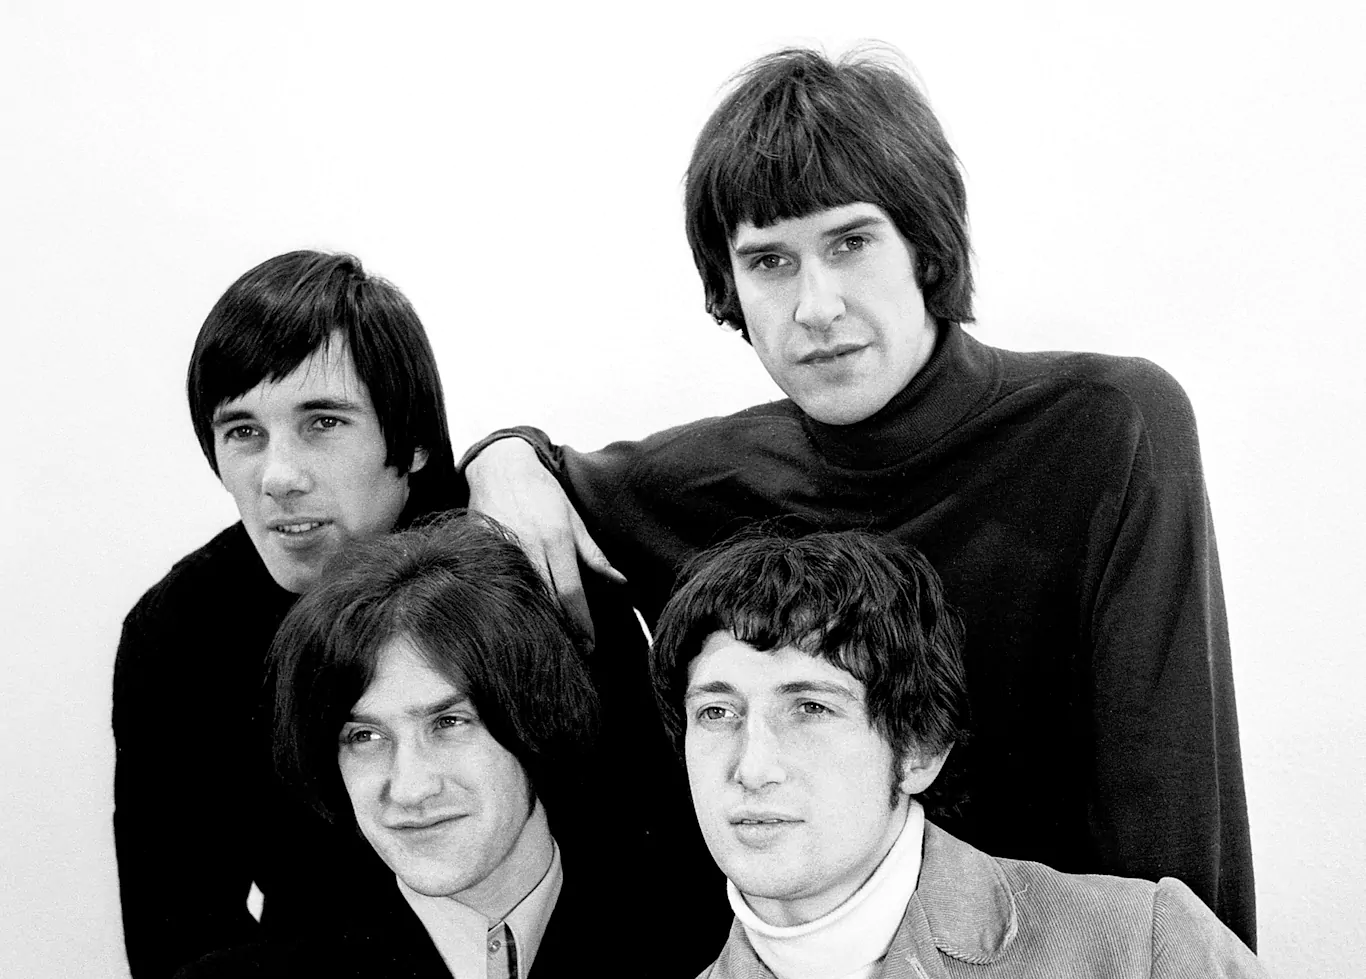 THE KINKS celebrate their 60th Anniversary with two-part special anniversary anthology release